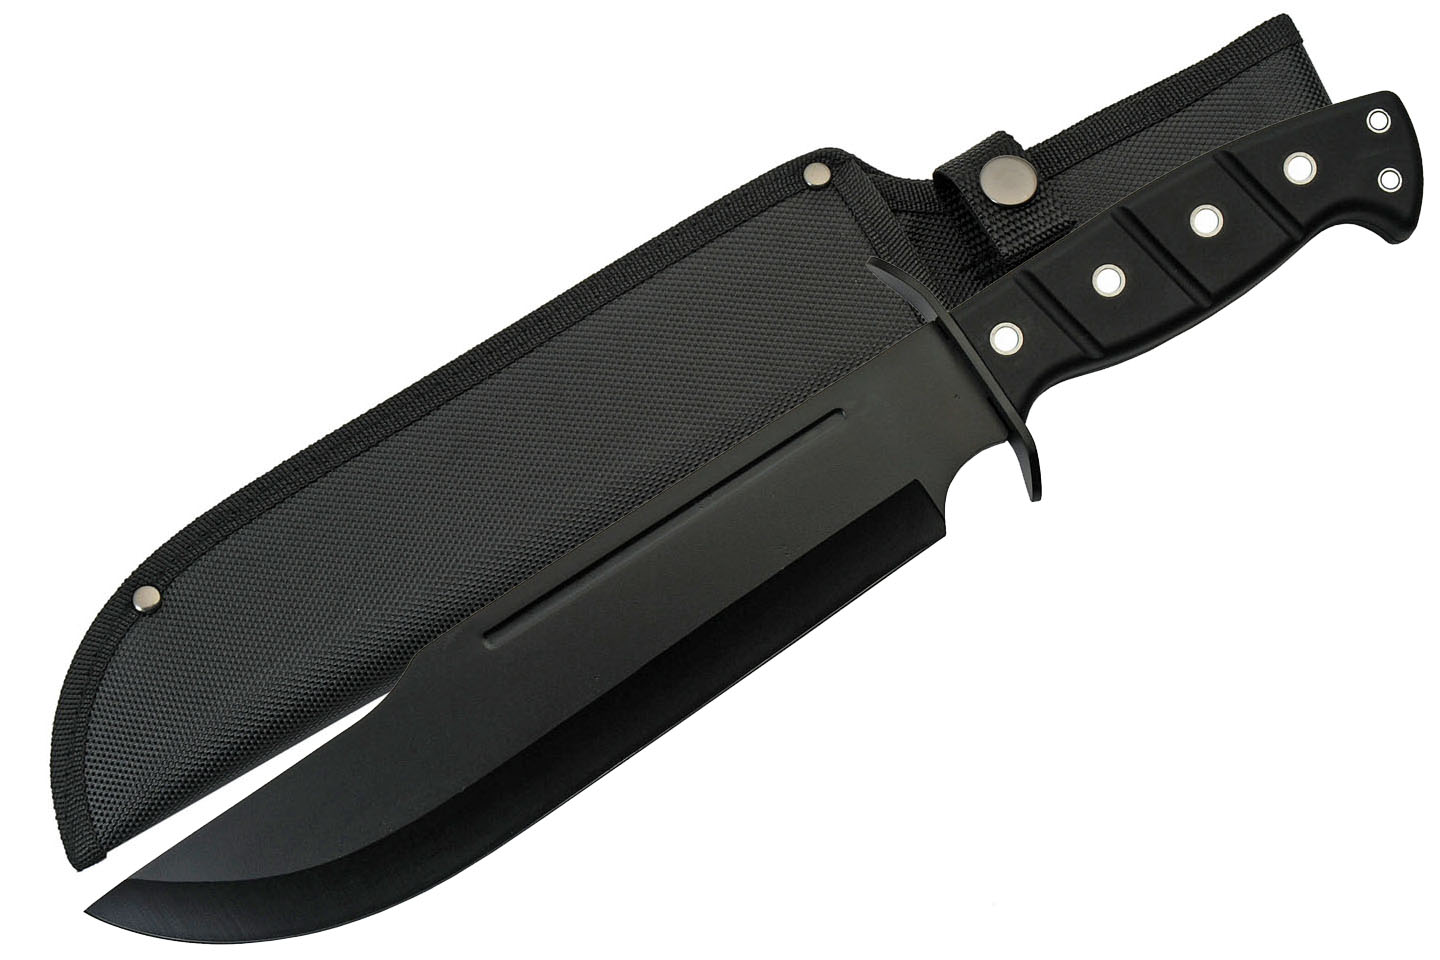 Bowie Knife 15in. Overall Rite Edge Black Tactical Combat Fighter + Sheath